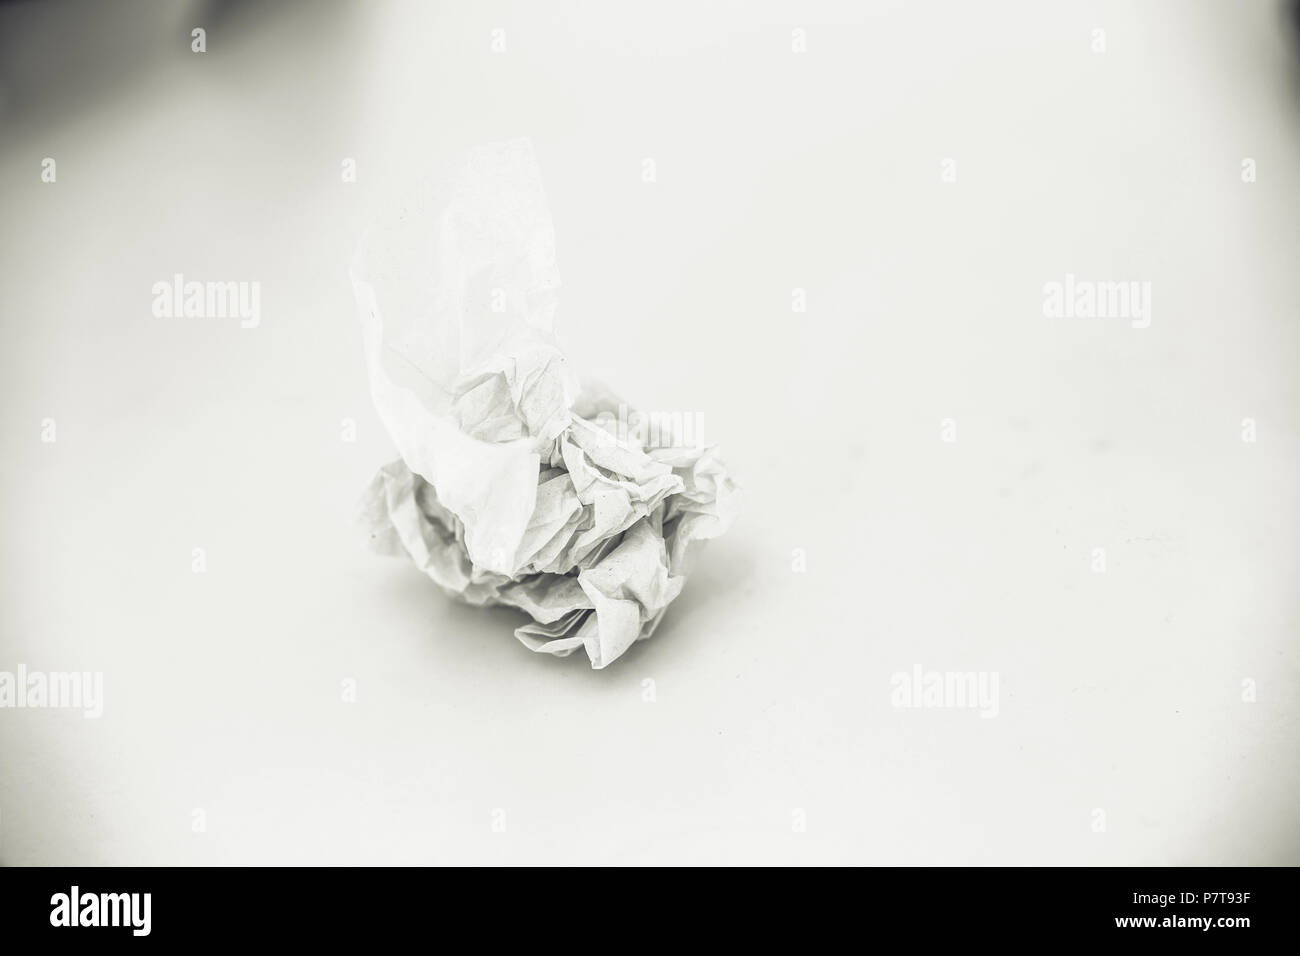 Crumpled paper on white table background Stock Photo